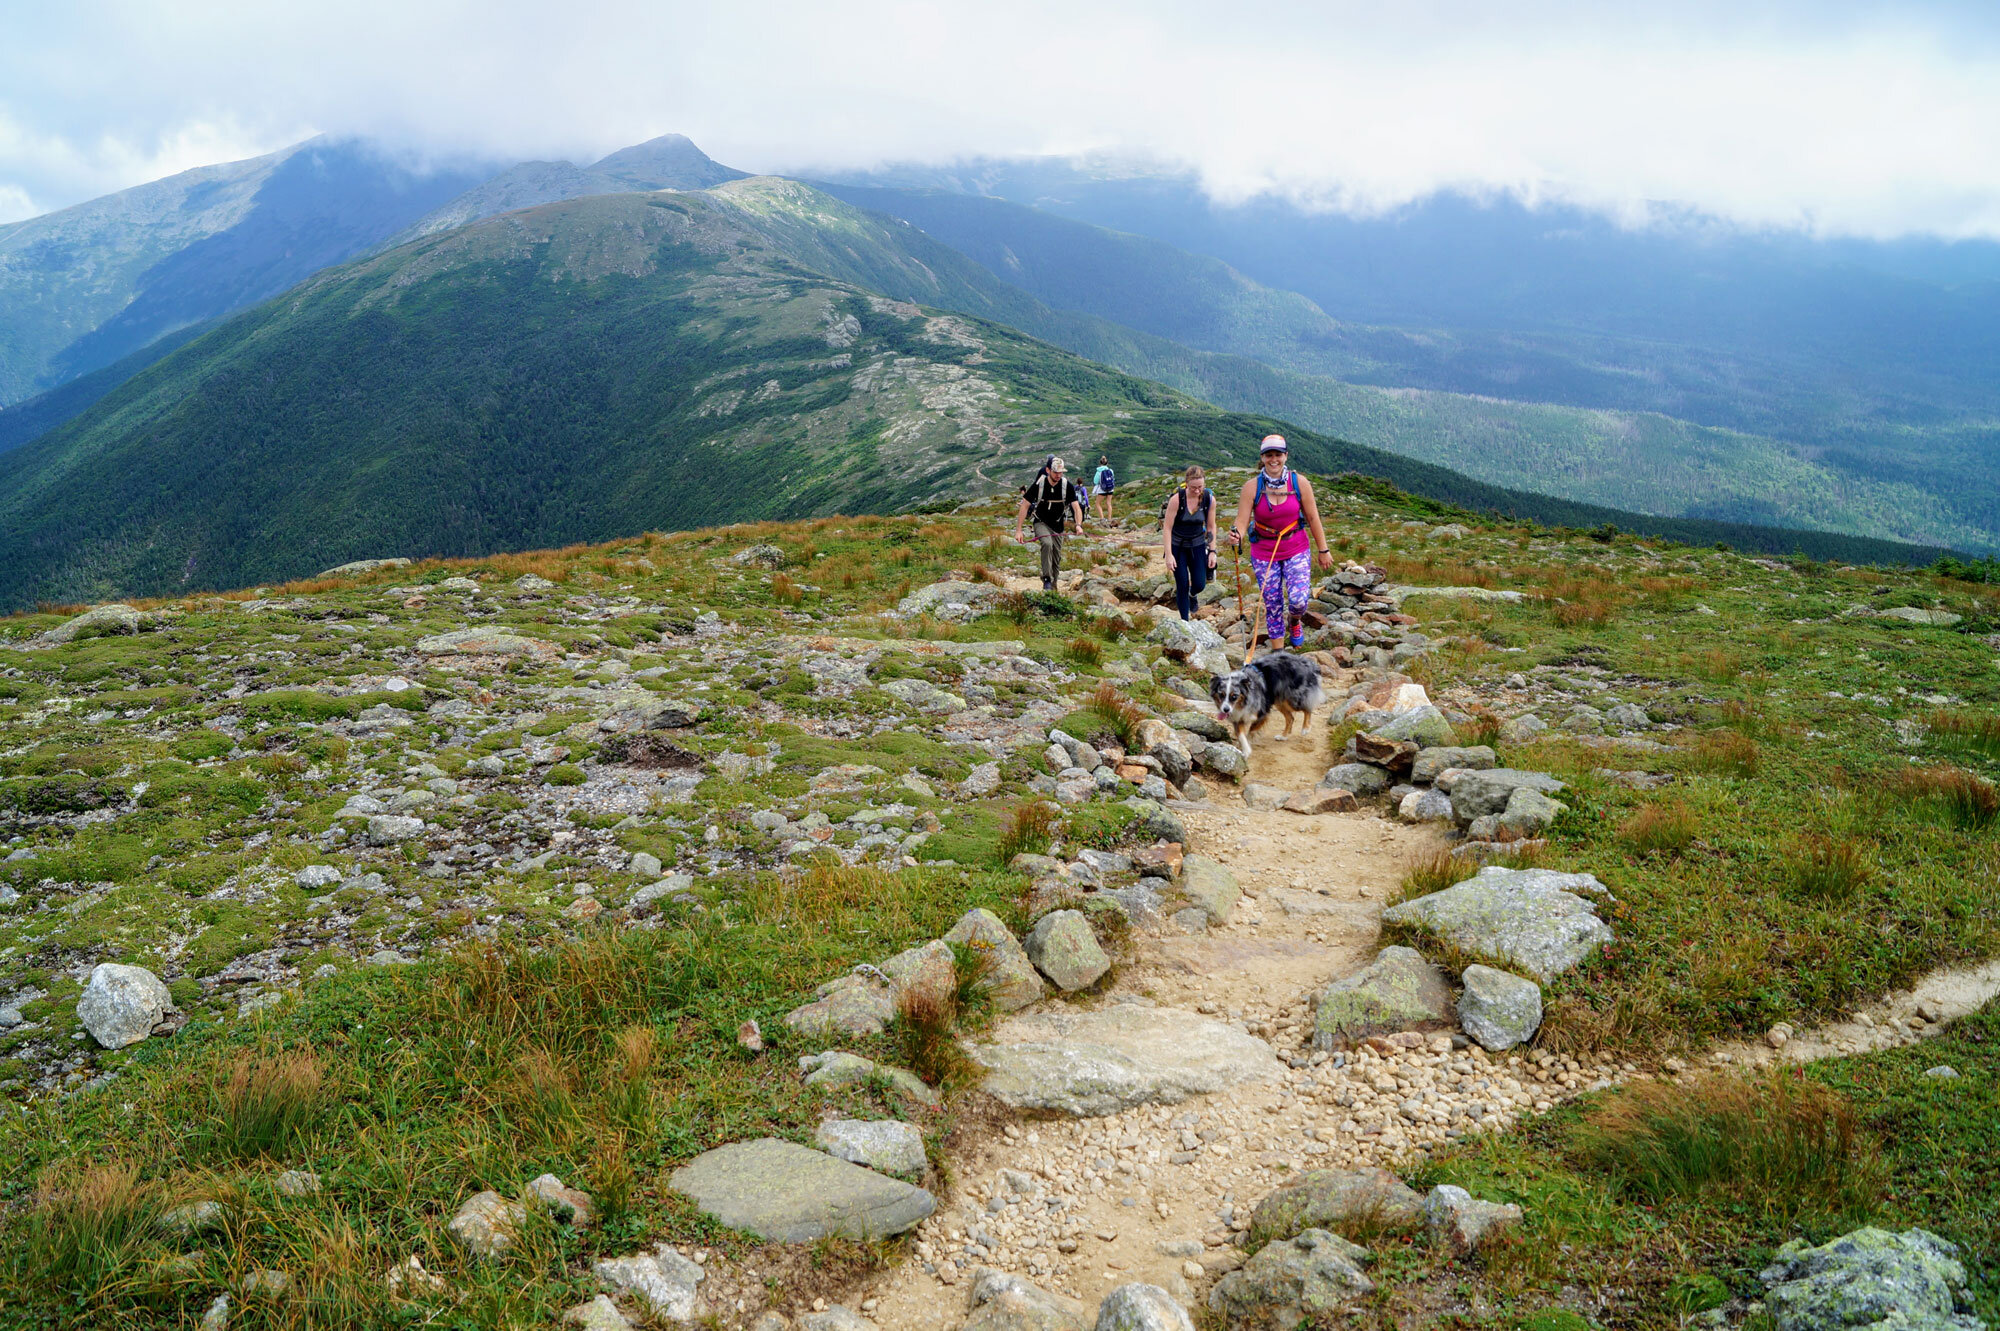 A Beginners Guide to Hiking in the White Mountains